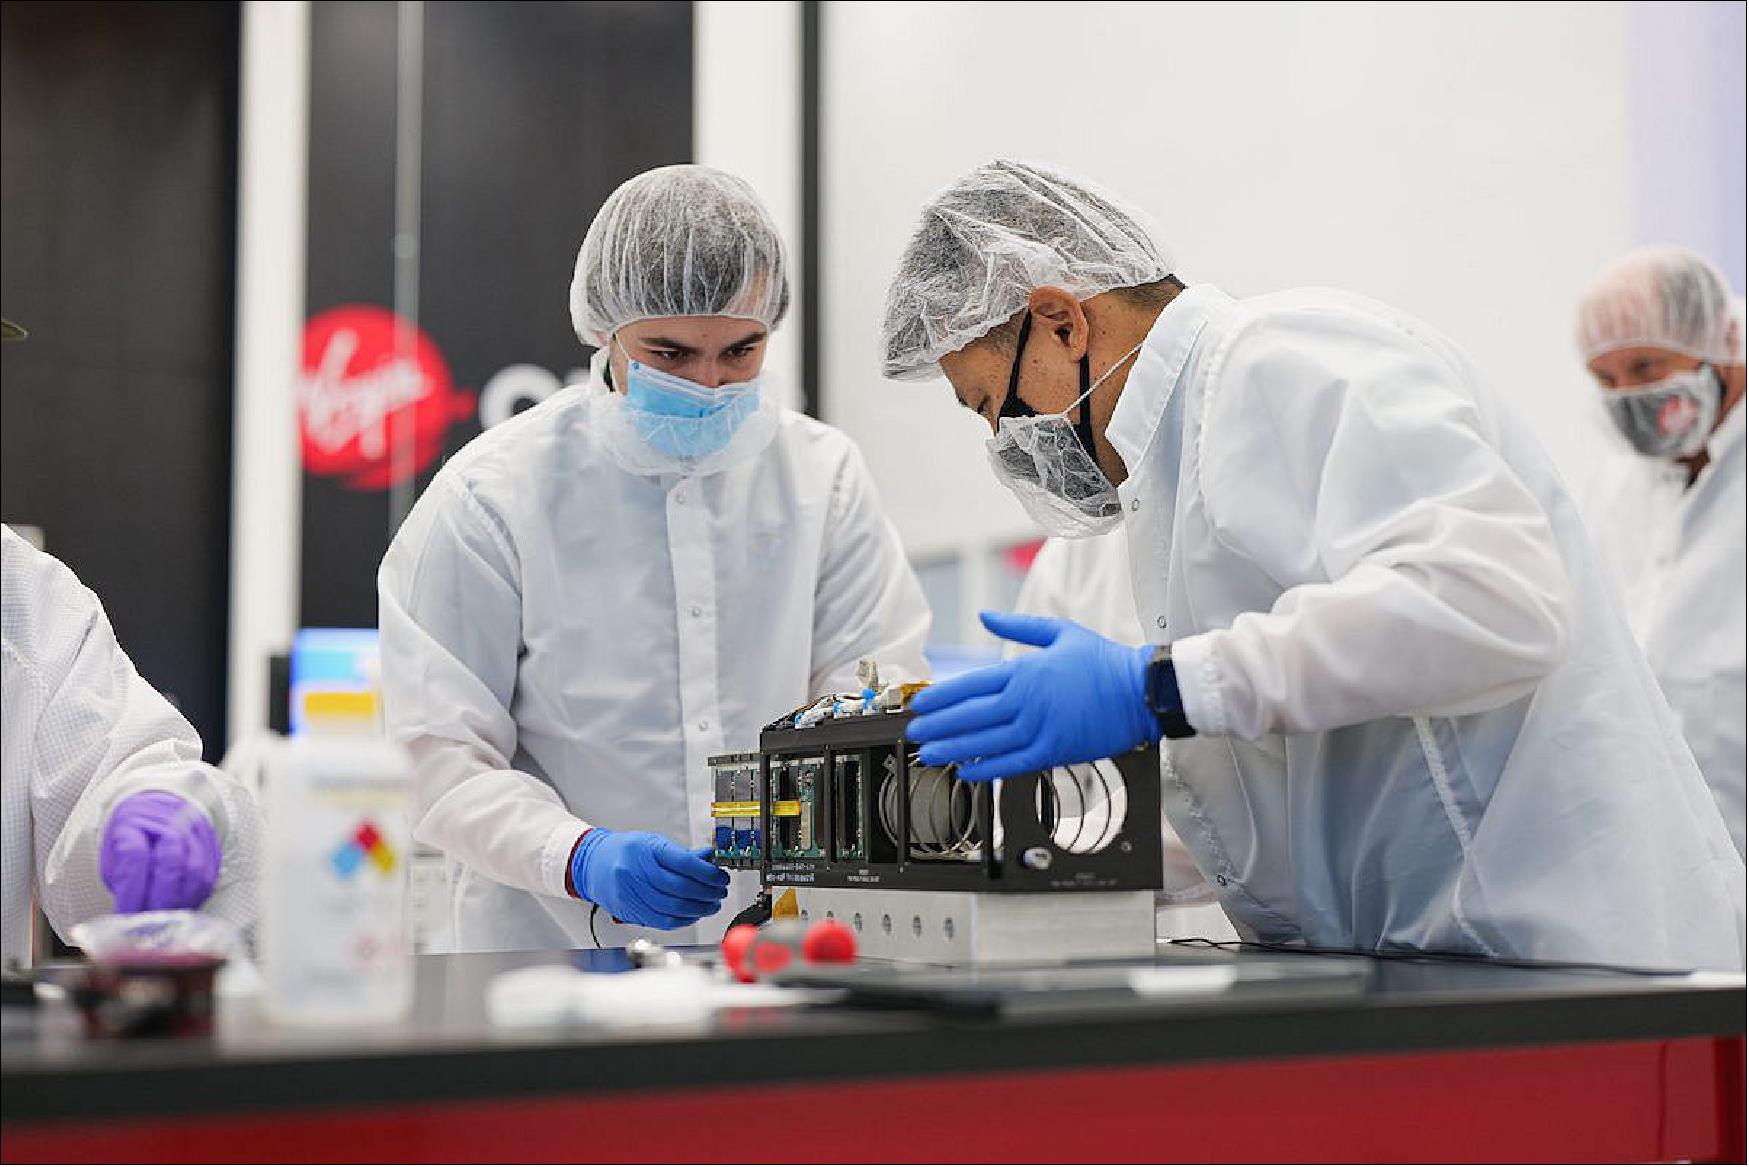 Figure 12: Payload technicians prepare one of the 10 CubeSats on the Launch Demo 2 mission for loading into its deployment mechanism (image credit: Virgin Orbit)